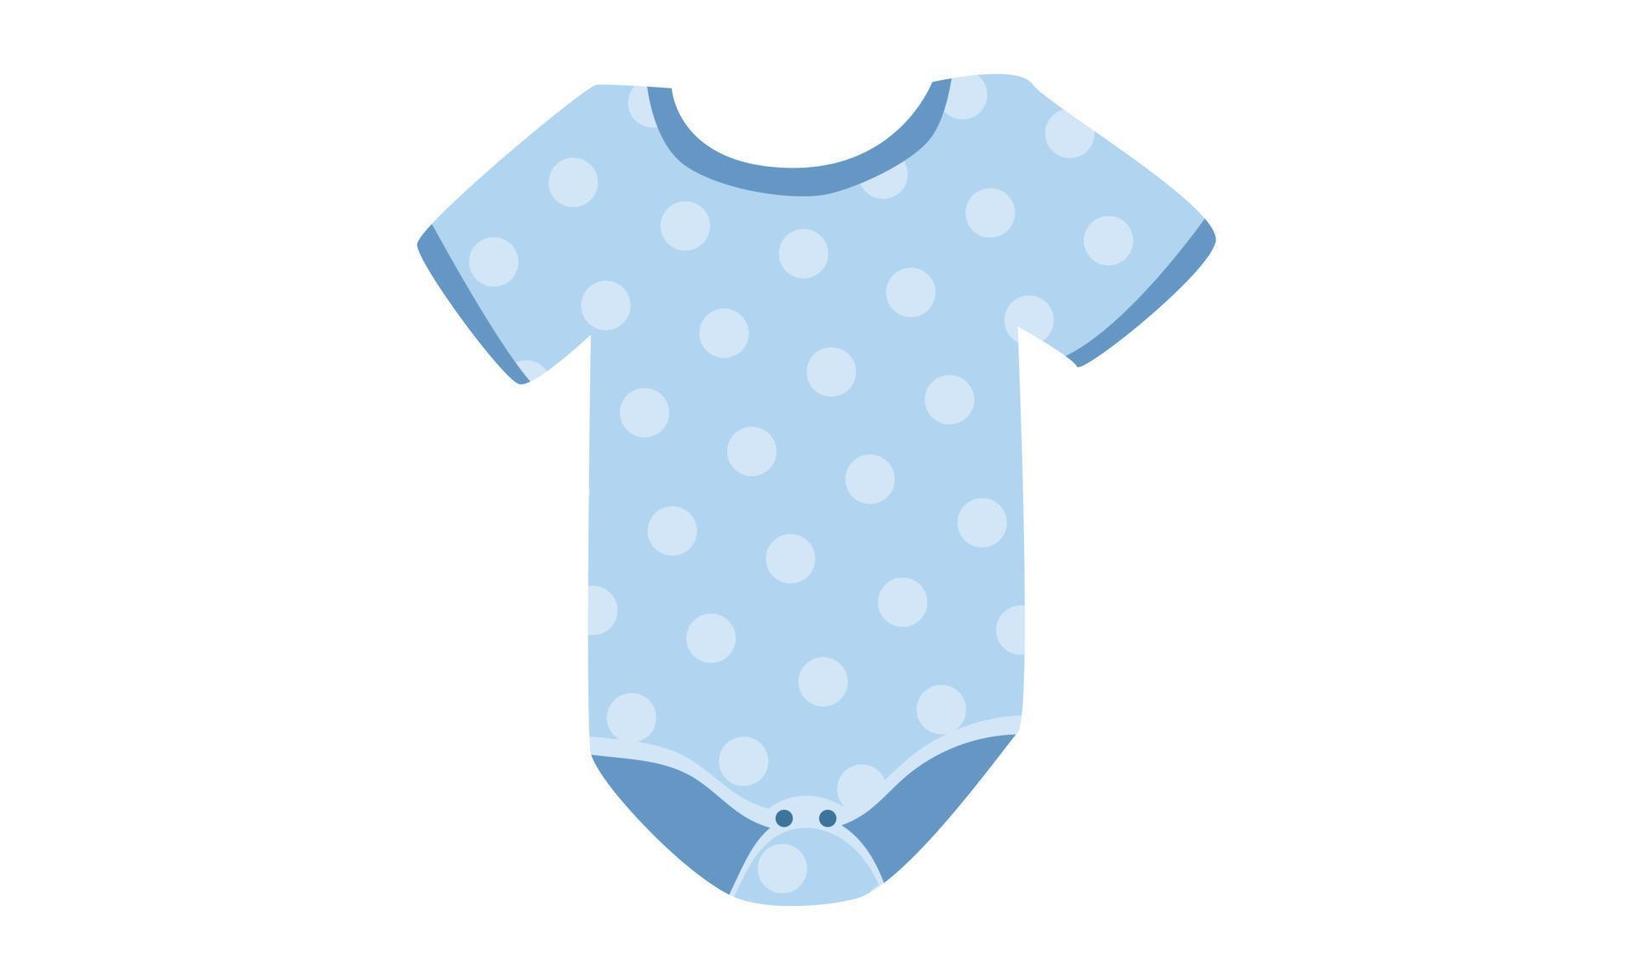 Blue baby onesie clipart. Simple cute baby onesie with polka dot pattern design flat vector illustration. Baby bodysuit, body children, baby shirt, romper, clothes for newborns cartoon drawing